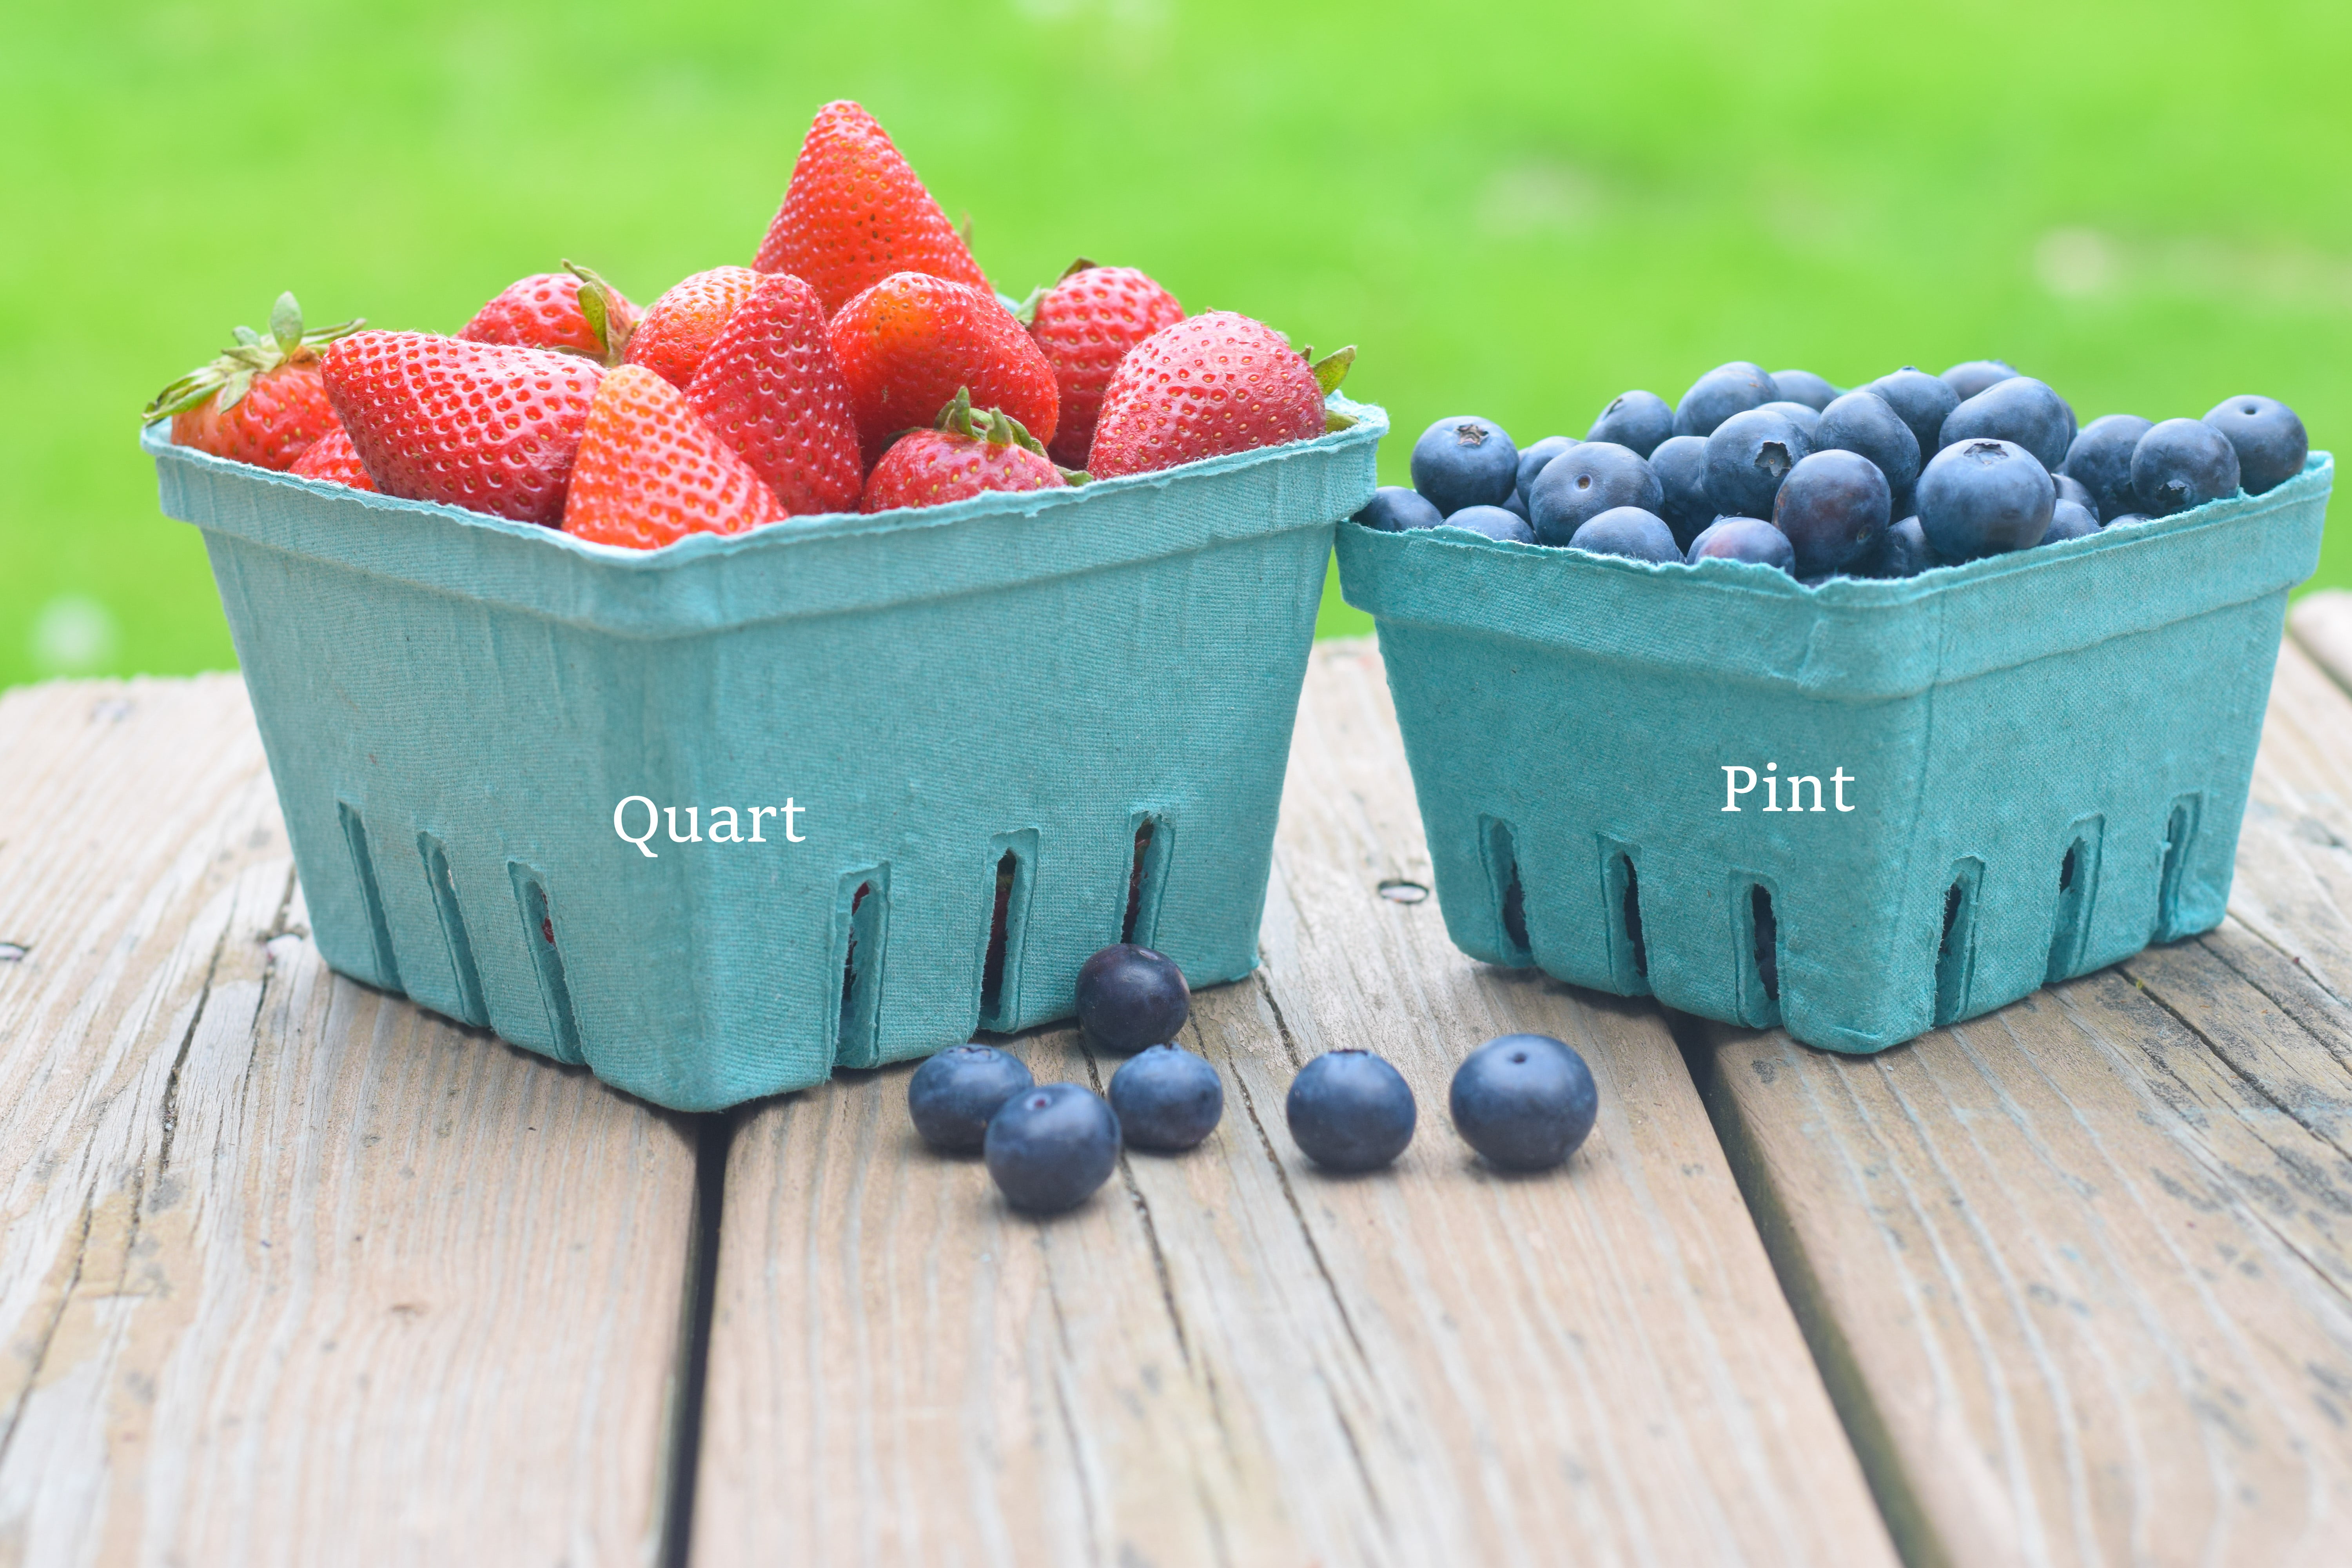 MT Products 1 Pint Vented Green Molded Pulp Fiber Berry Baskets - Pack of  15